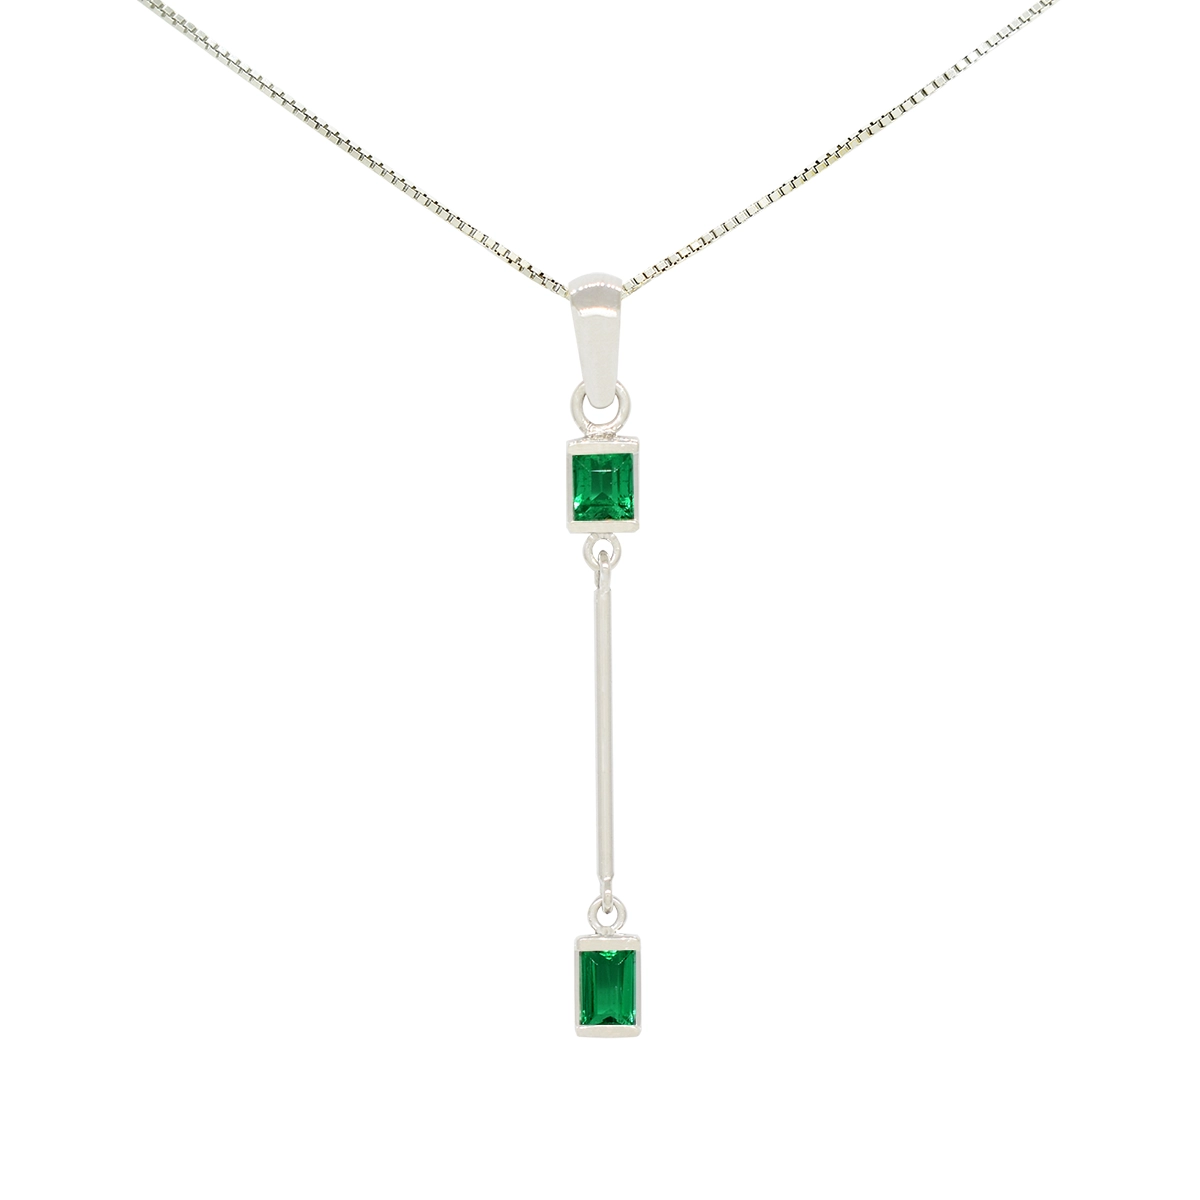 Delicate Emerald Pendant in 18K White Gold with Baguette Cut Emeralds